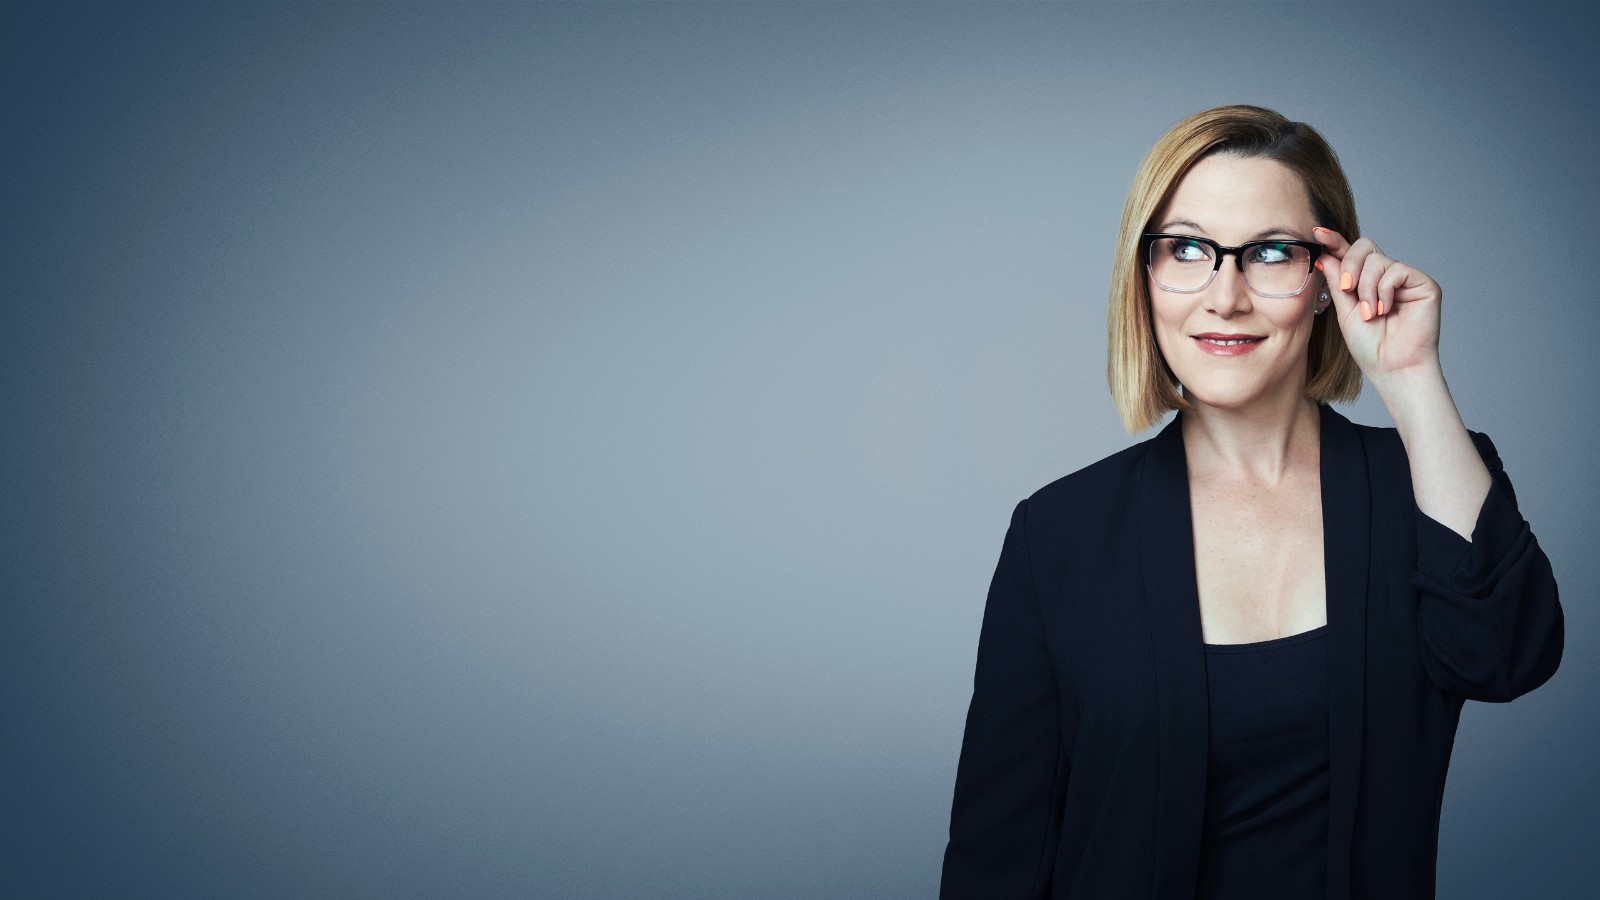 S E Cupp Bio Age Height Husband Salary Net Worth Cnn Hot Sex Picture